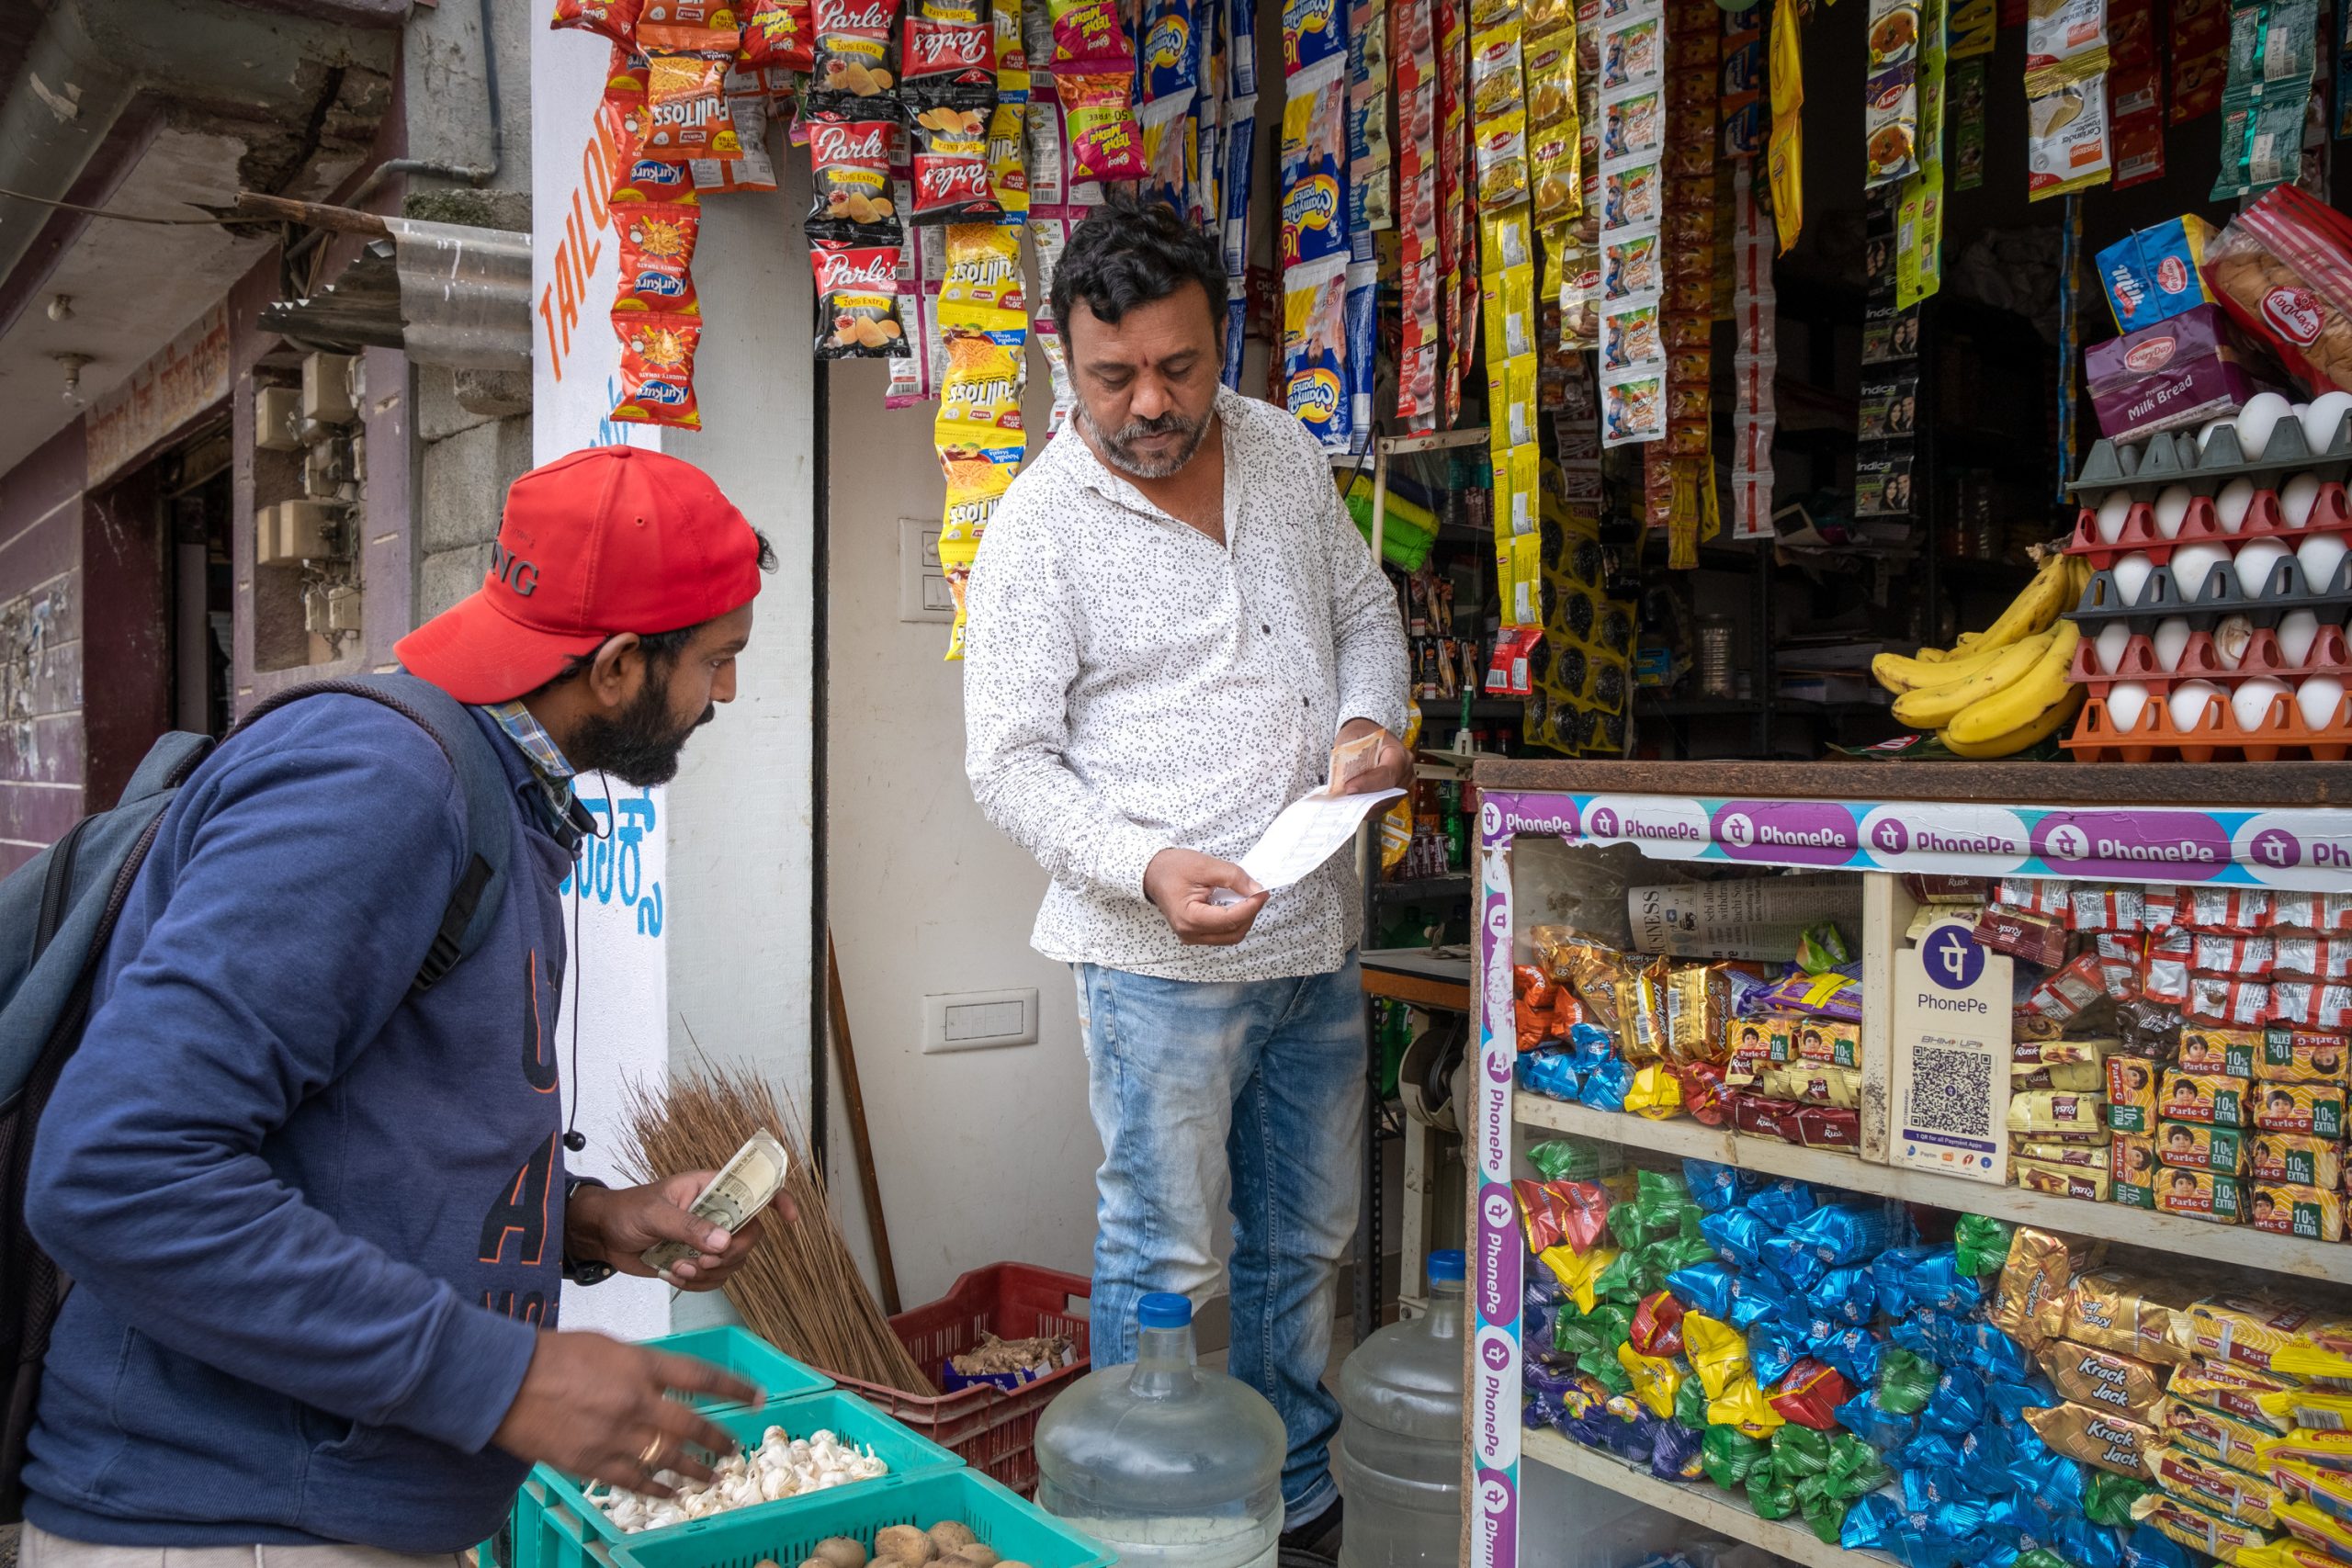 Jayappa S. in front of his store with customer